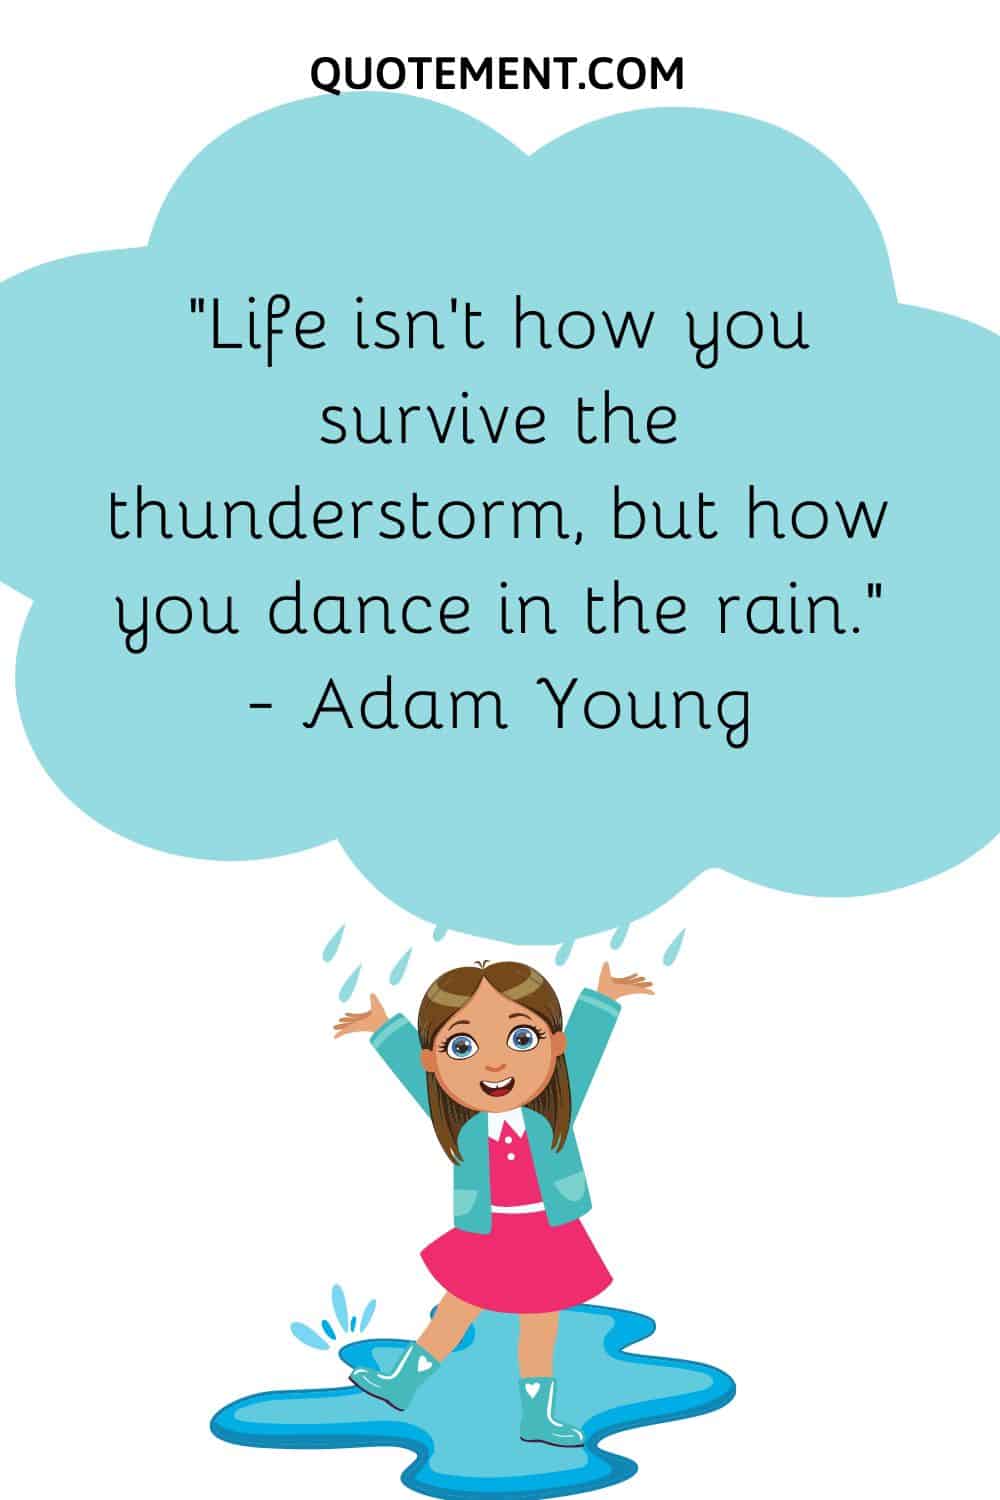 Life isn’t how you survive the thunderstorm, but how you dance in the rain